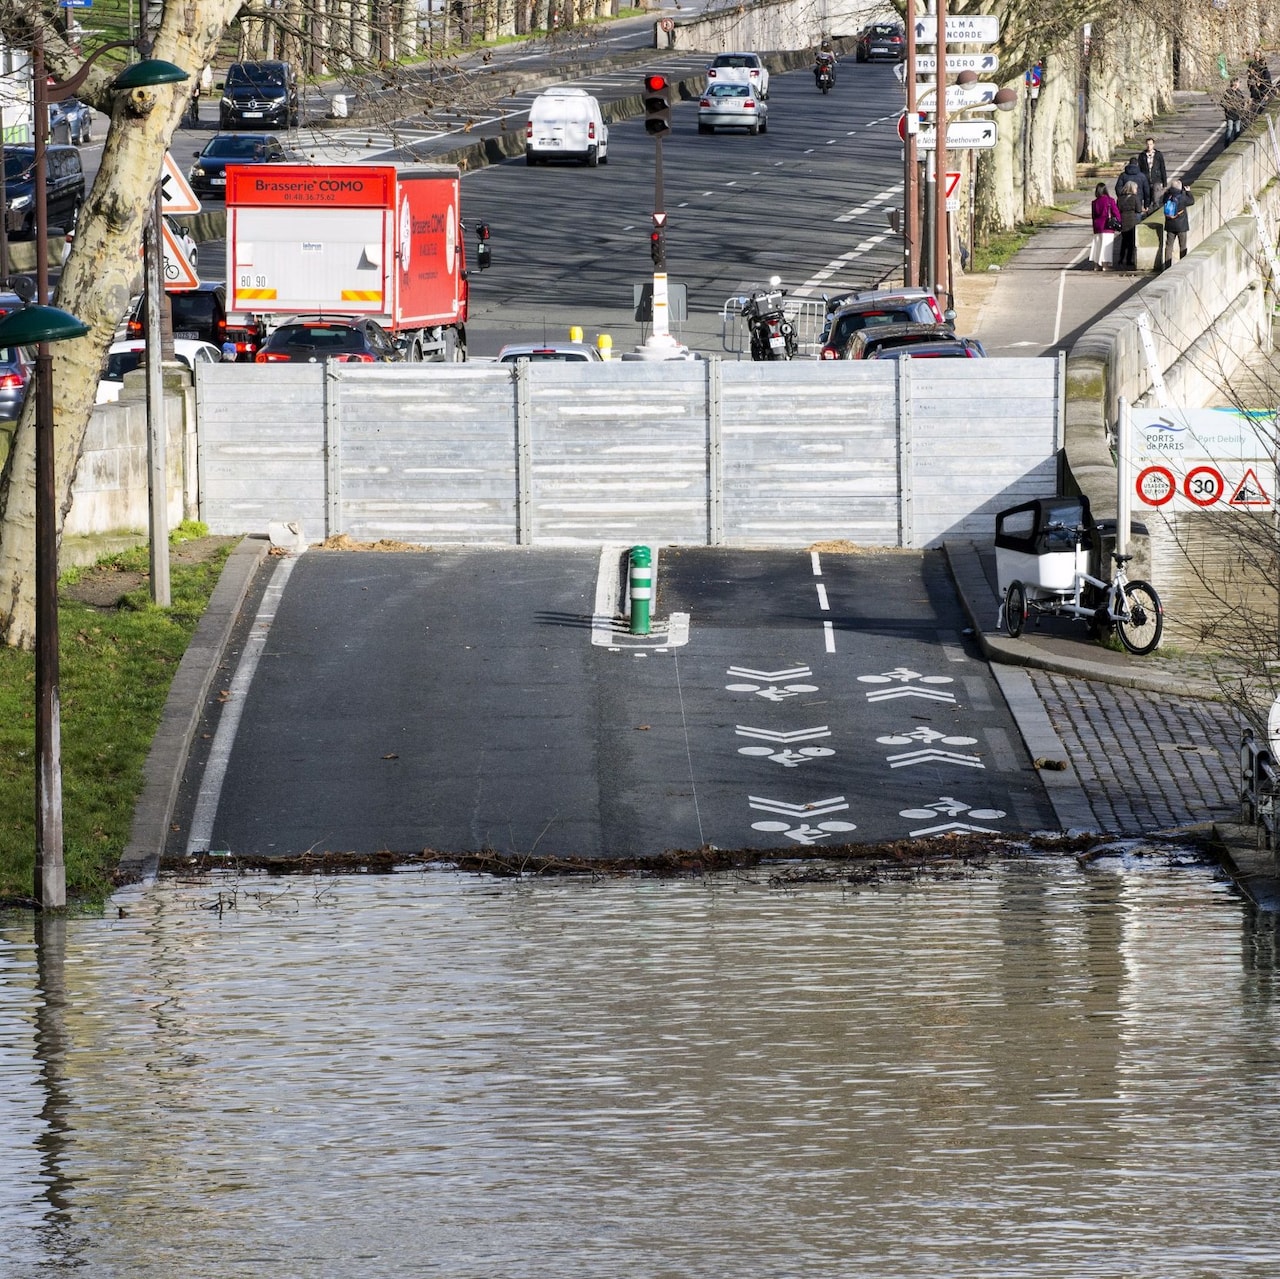 Paris on flooding high alert as swollen River Seine set to rise further